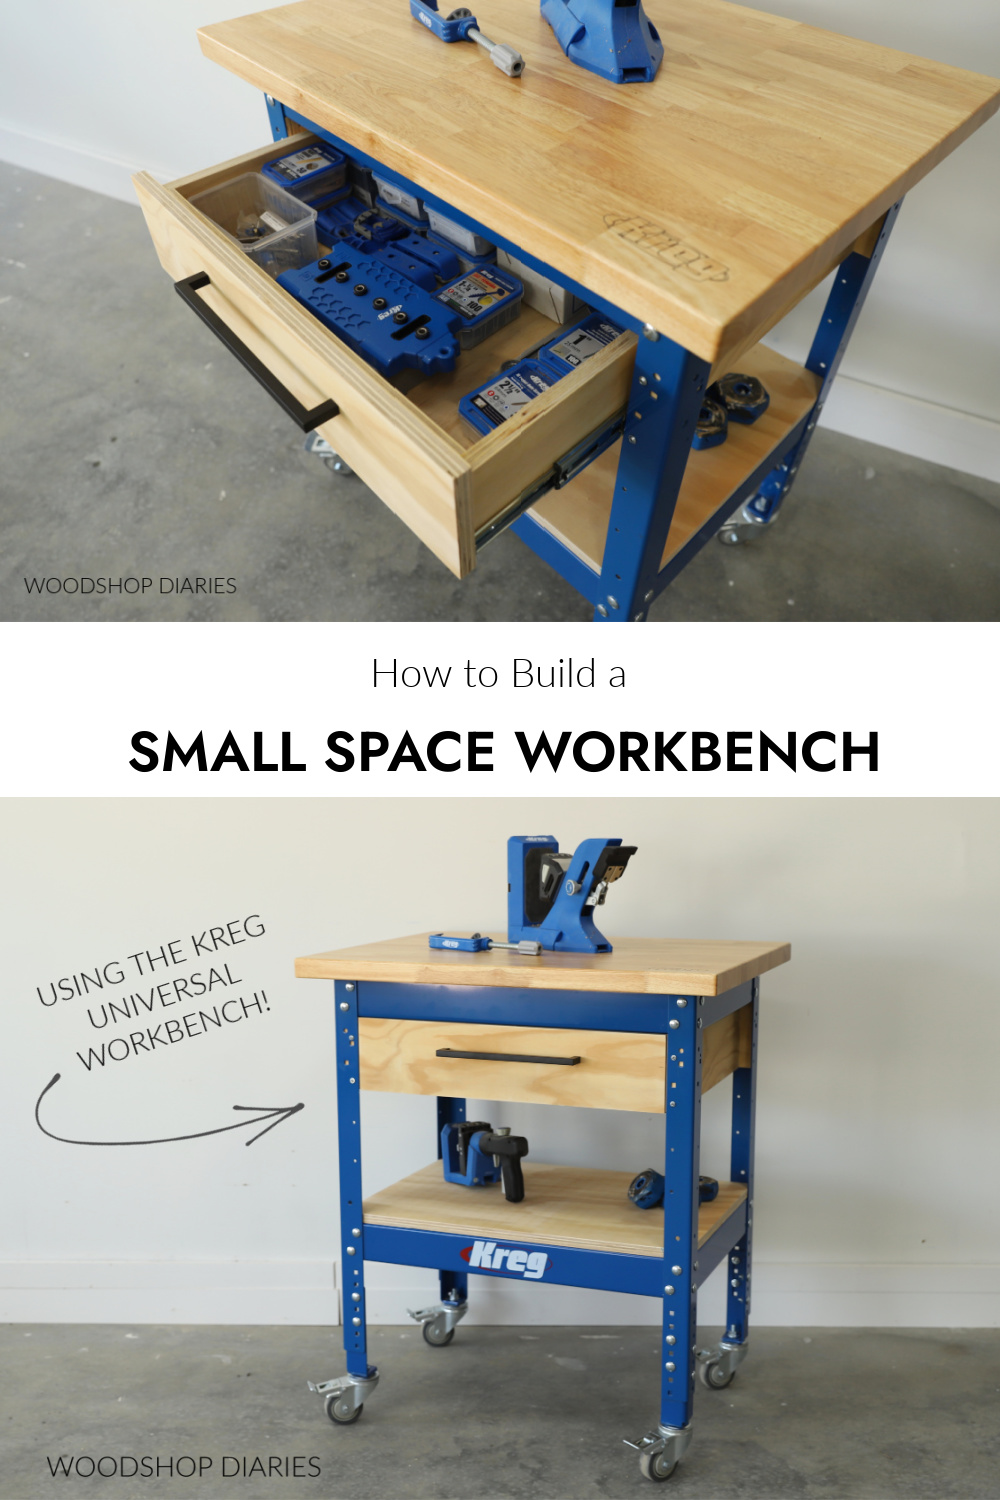 Pinterest collage image showing workbench with drawer open at top and completed metal frame workbench for small shop at bottom with text "how to build a small space workbench"